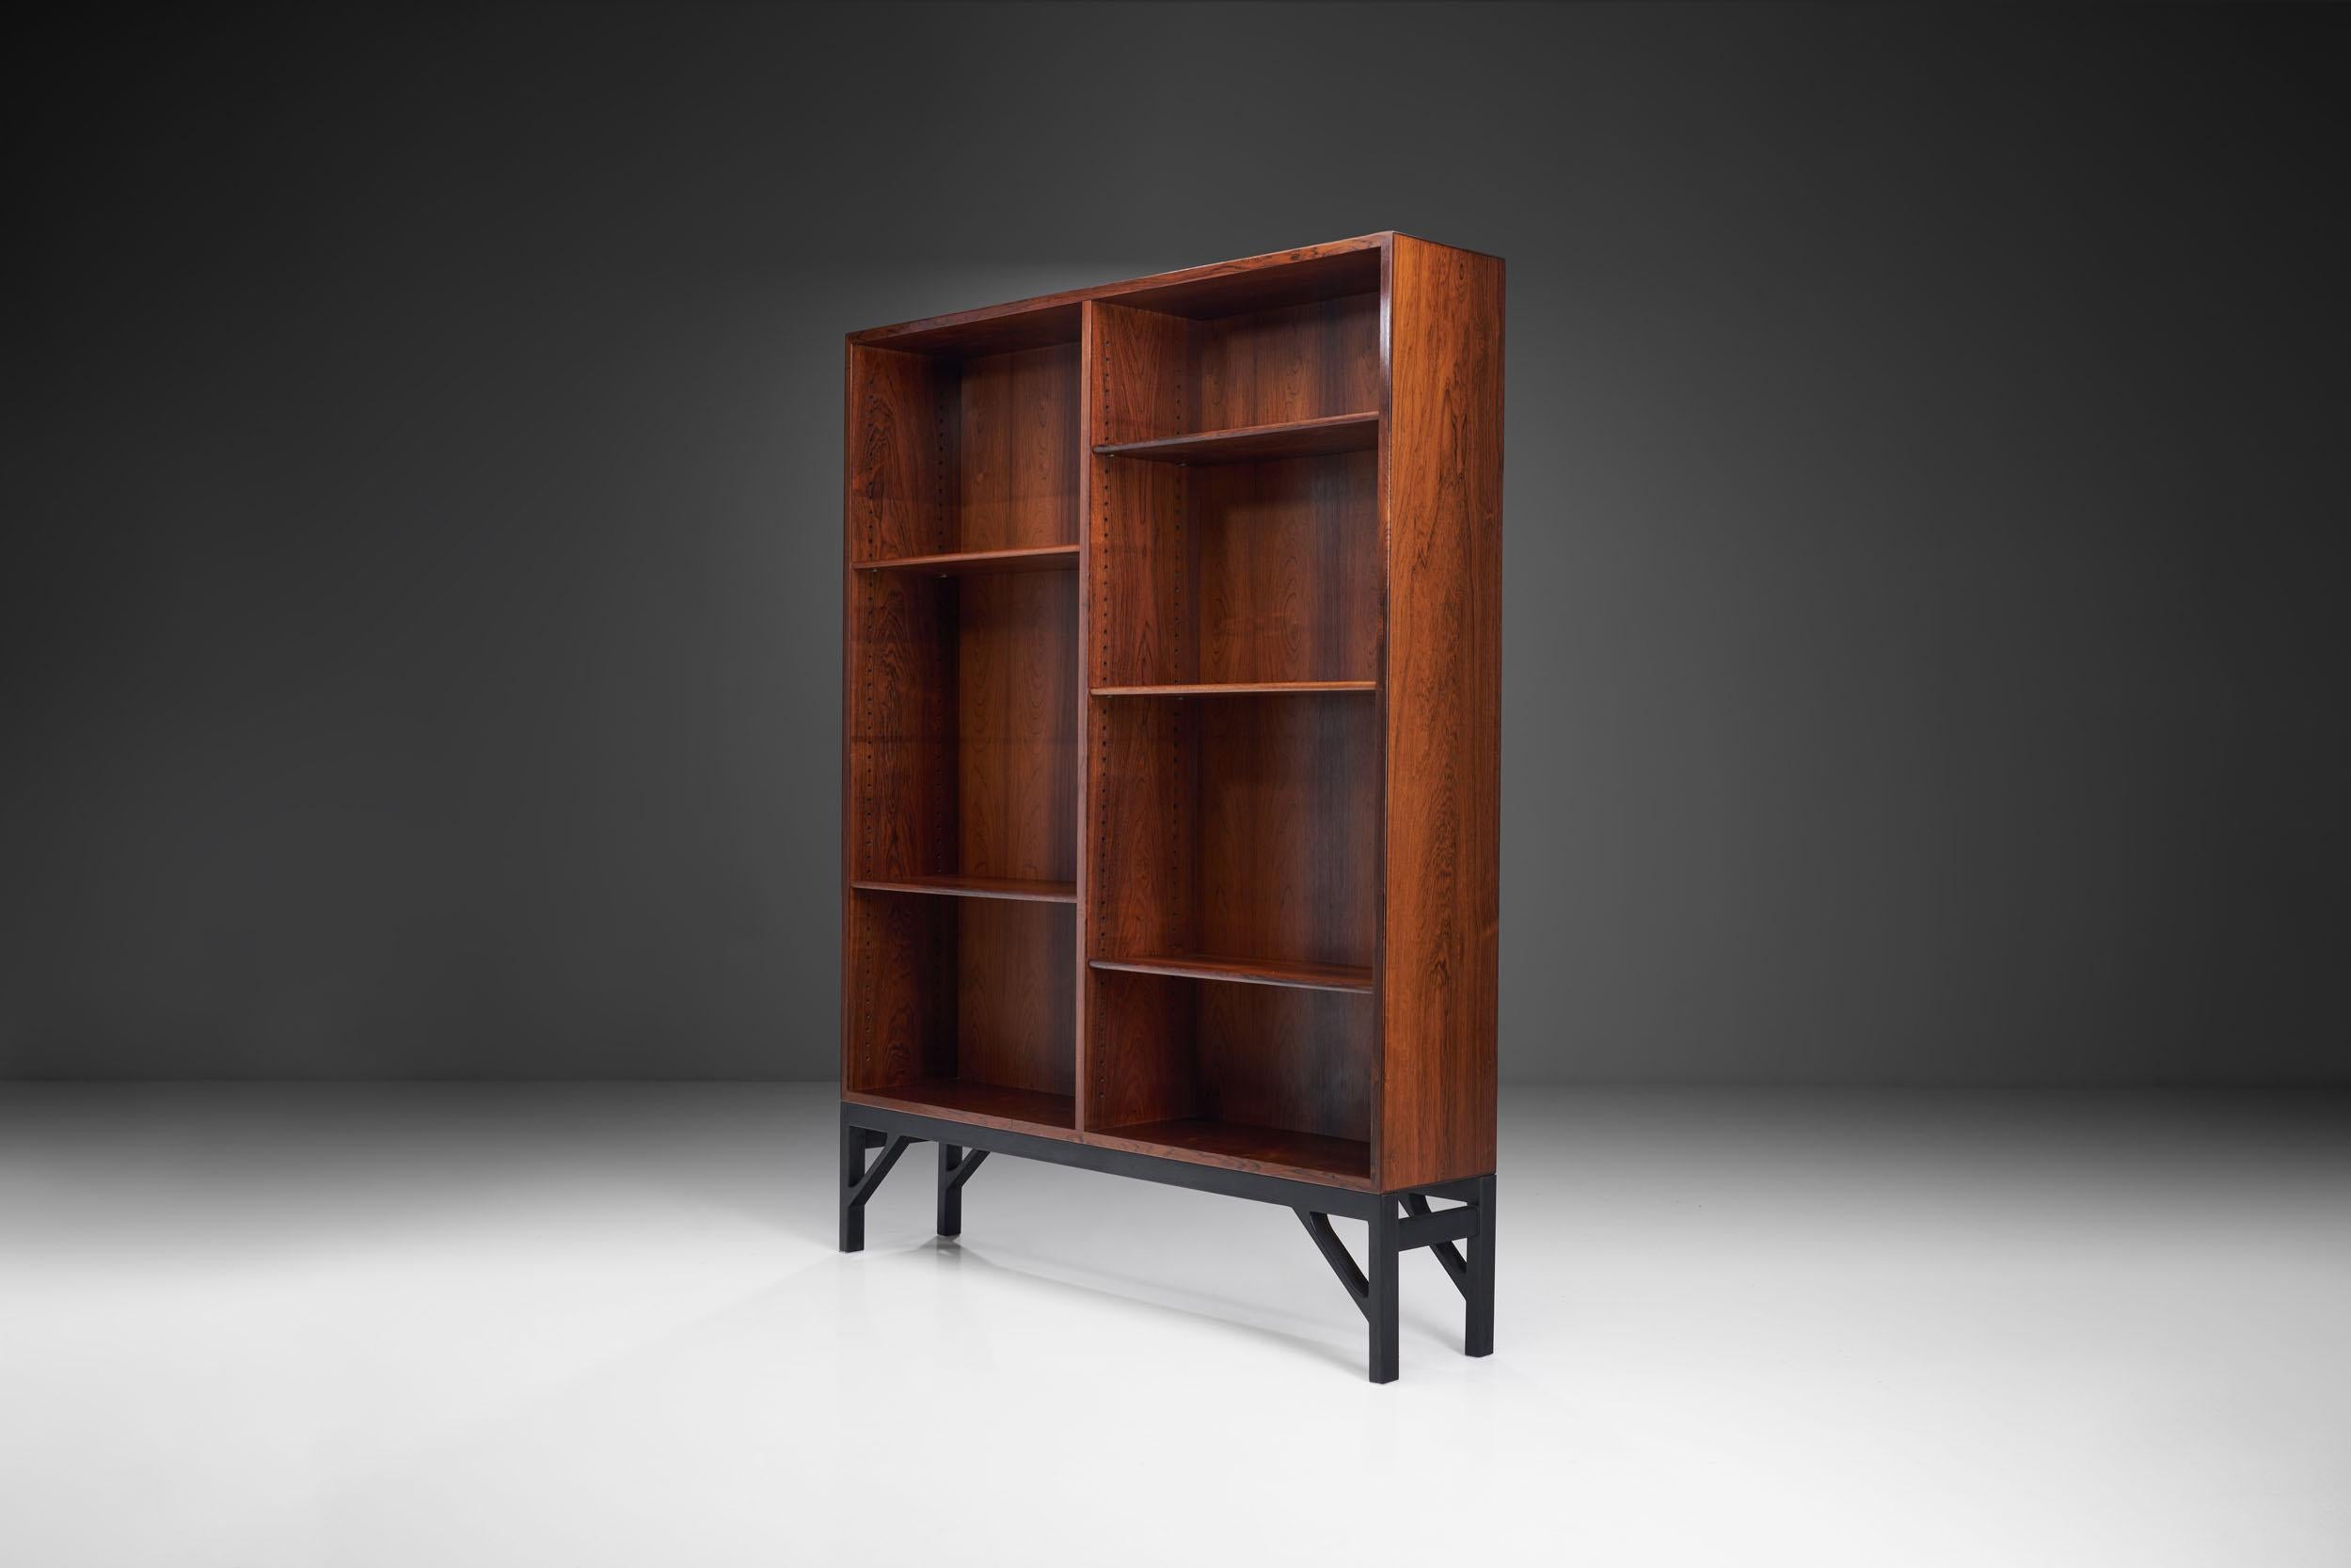 This impressive bookcase designed by Børge Mogensen reflects the Danish designer’s aesthetic that was clean and highly functional, creating pieces that stand out despite their restrained design.

The bookcase is made with a beautiful woodgrain that